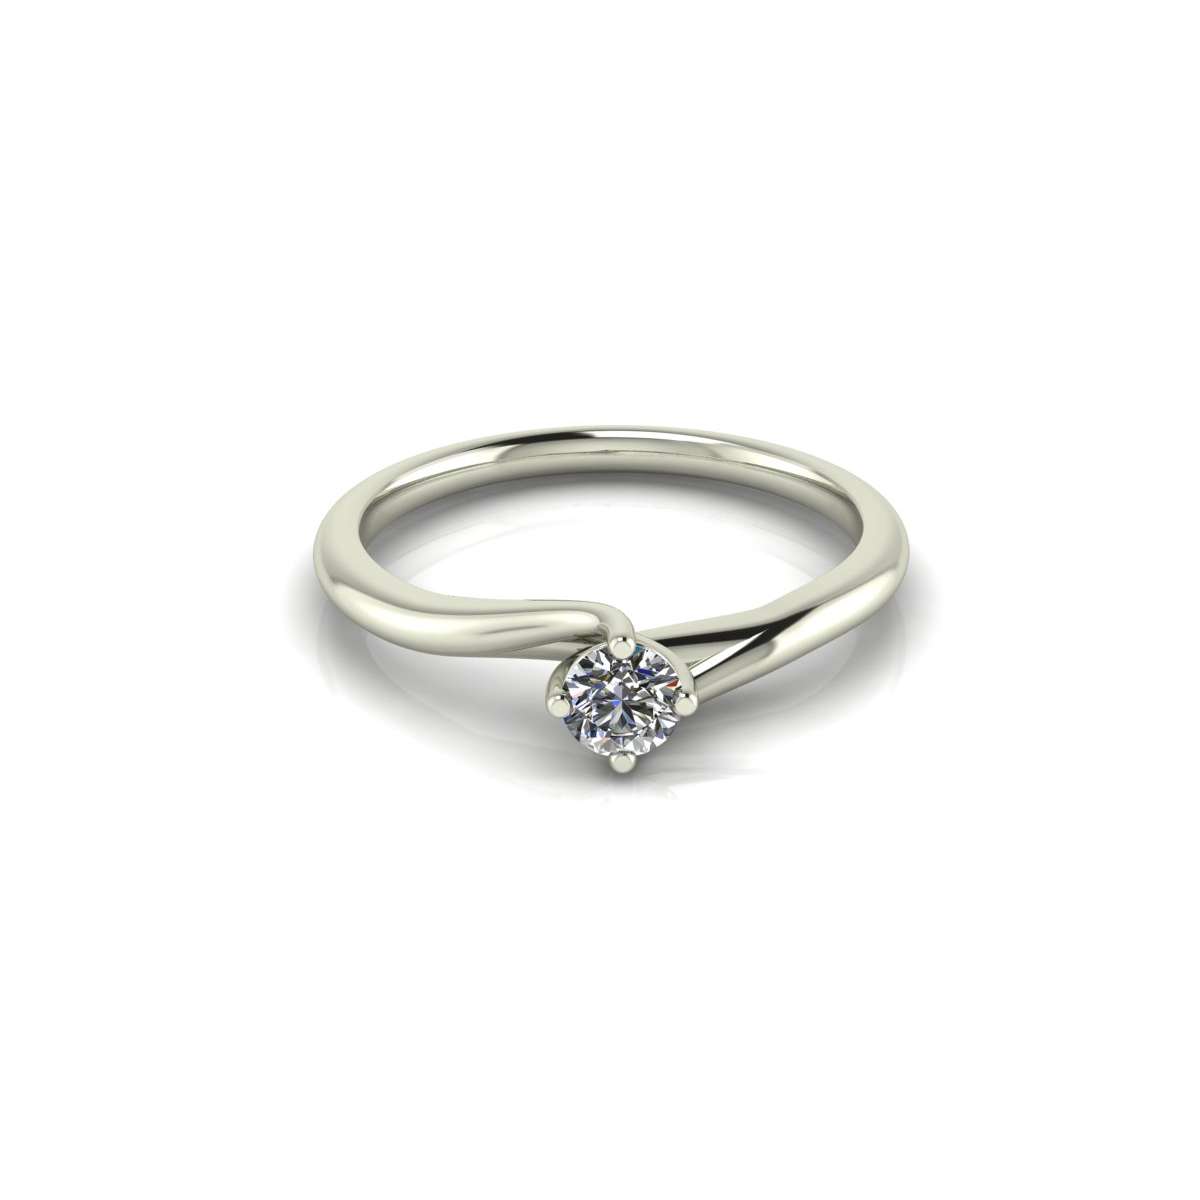 Women's solitaire ring at low prices made of white gold with a GIA carat certificate of 0.30 F-IF